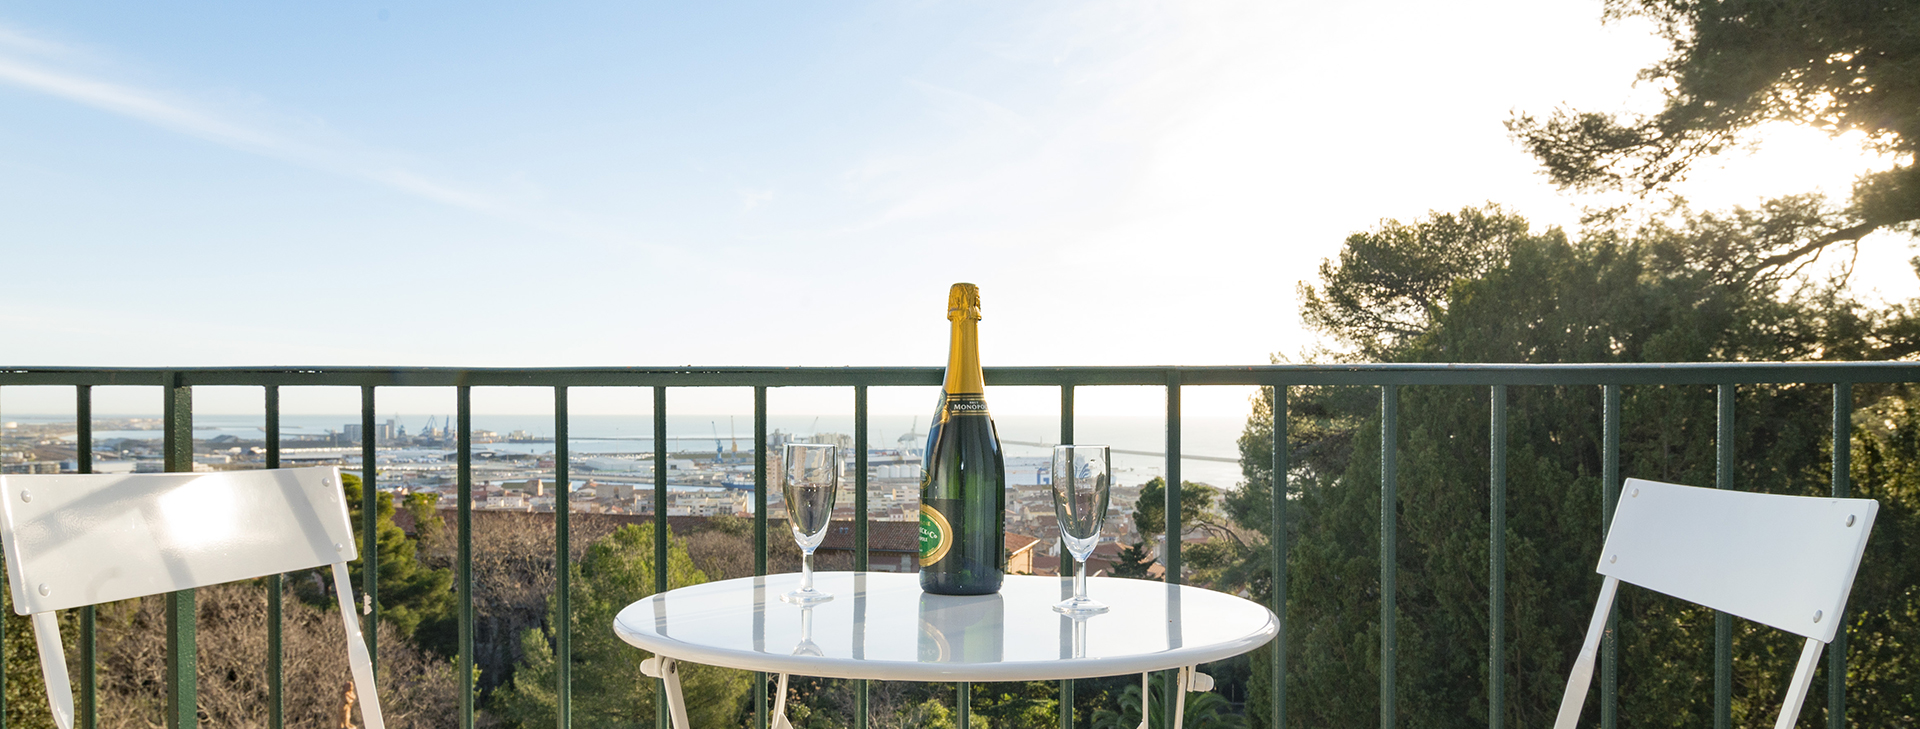 Champagne on the terrace. Logis du Mas, bed and breakfast in Sète